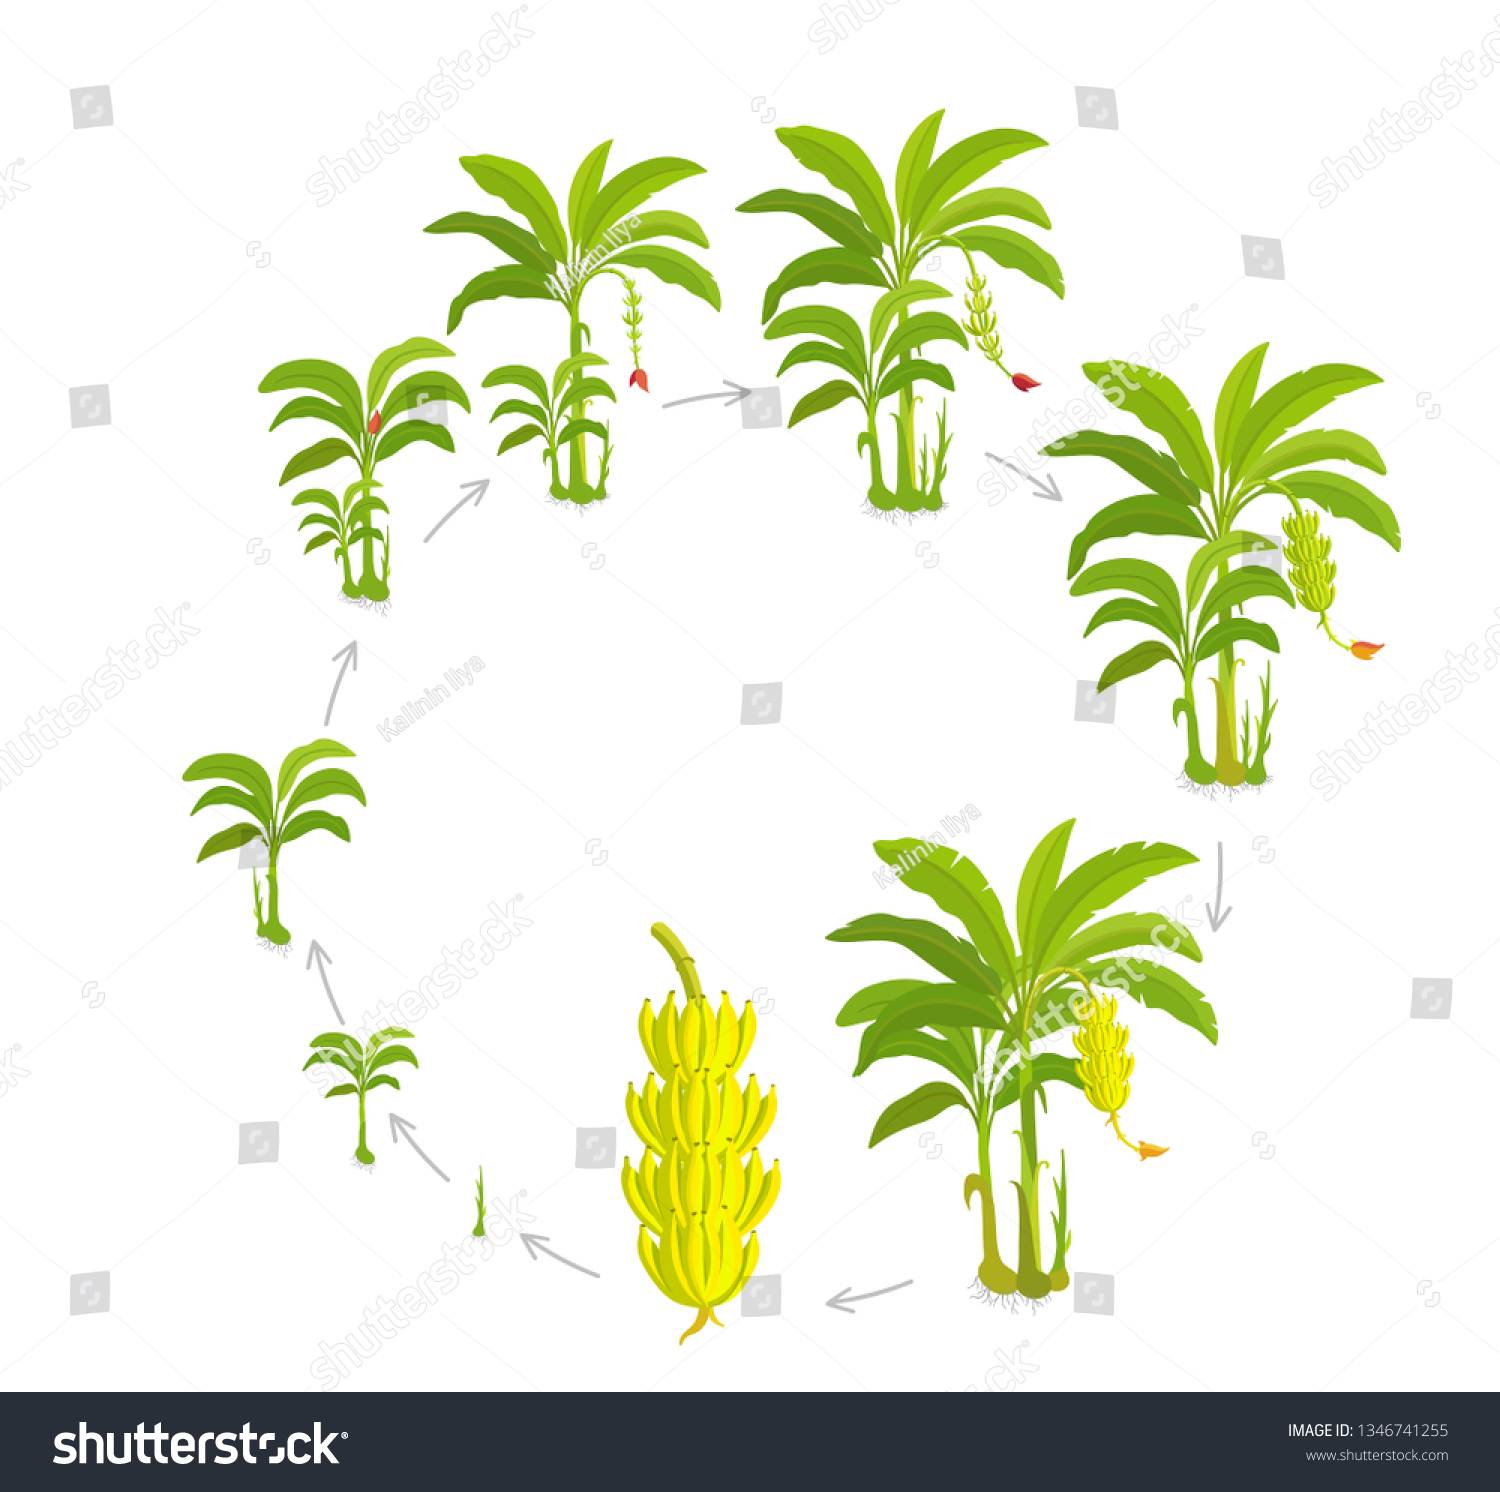 SVG of Round Crop cycle for banana tree. Crop stages bananas palm. Circular growing plants. Round harvest growth biology. Musa vector Illustration. svg